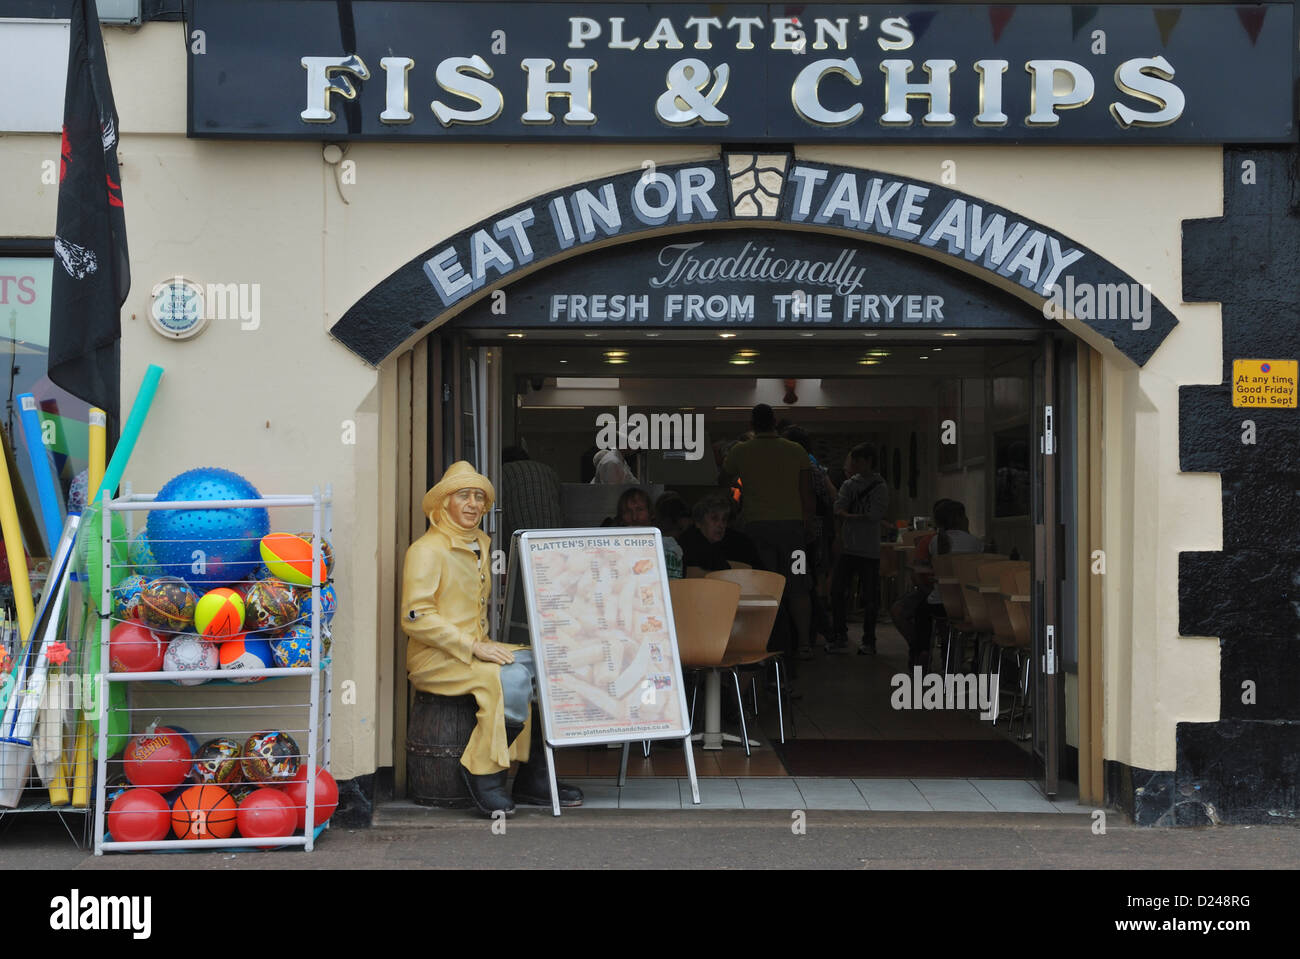 Platten's Fish and Chip shop, Wells-next-the-Sea, Norfolk, England. Stock Photo